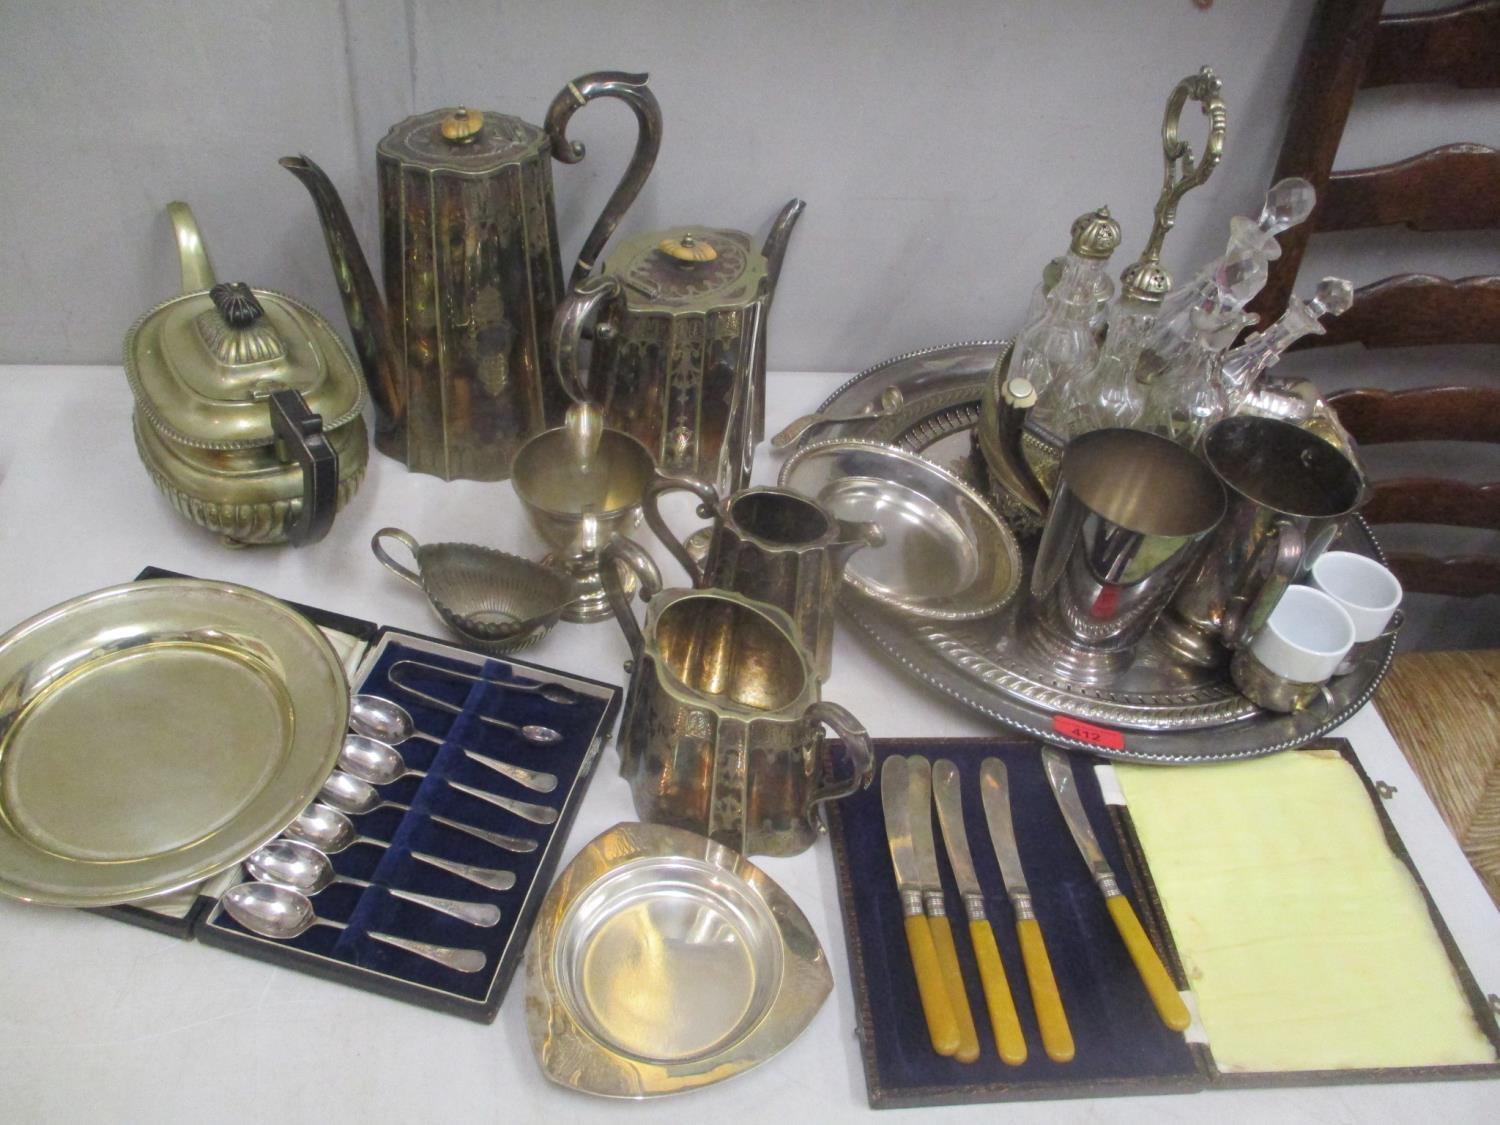 Silver plate and metalware to include teaware, a sauce boat, trays, a Turkish coffee pot, fire irons